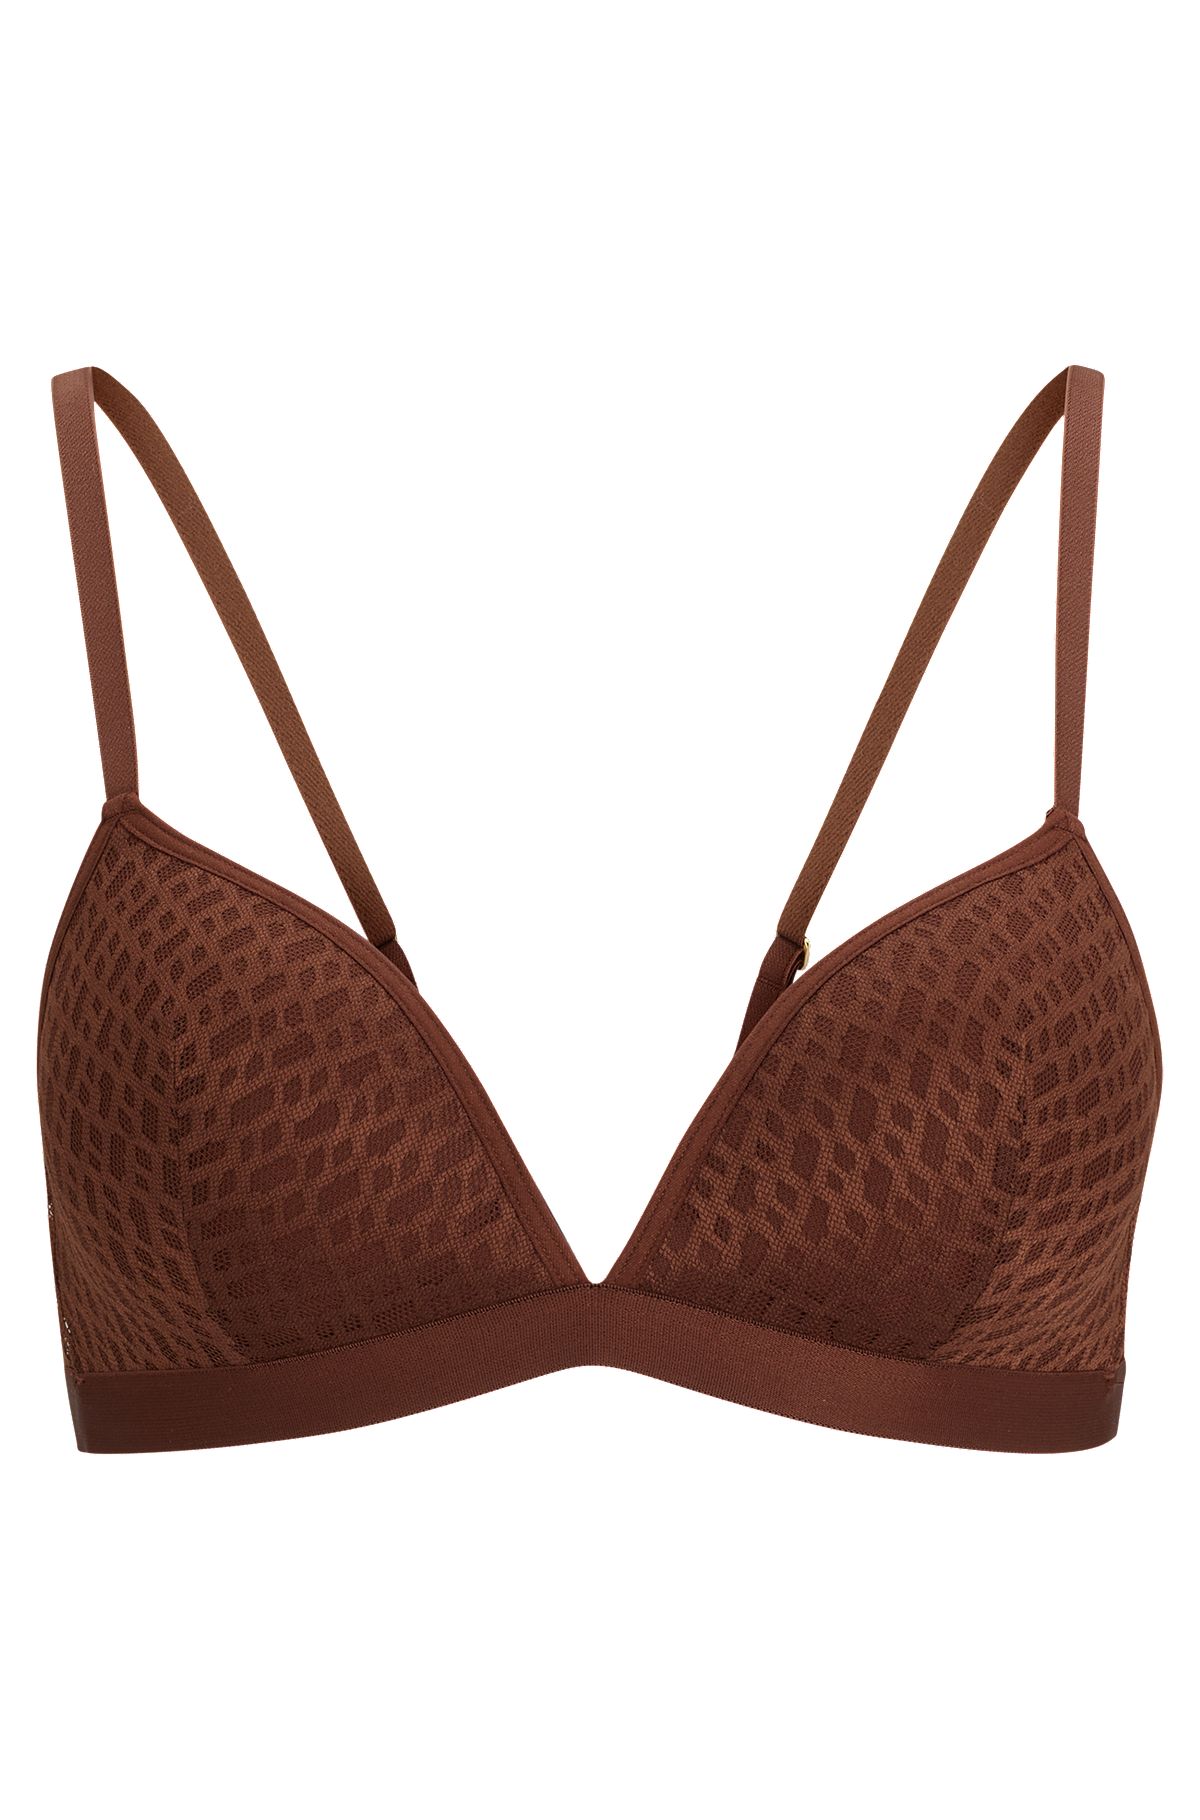 Padded triangle bra with monogram pattern and adjustable straps, Brown